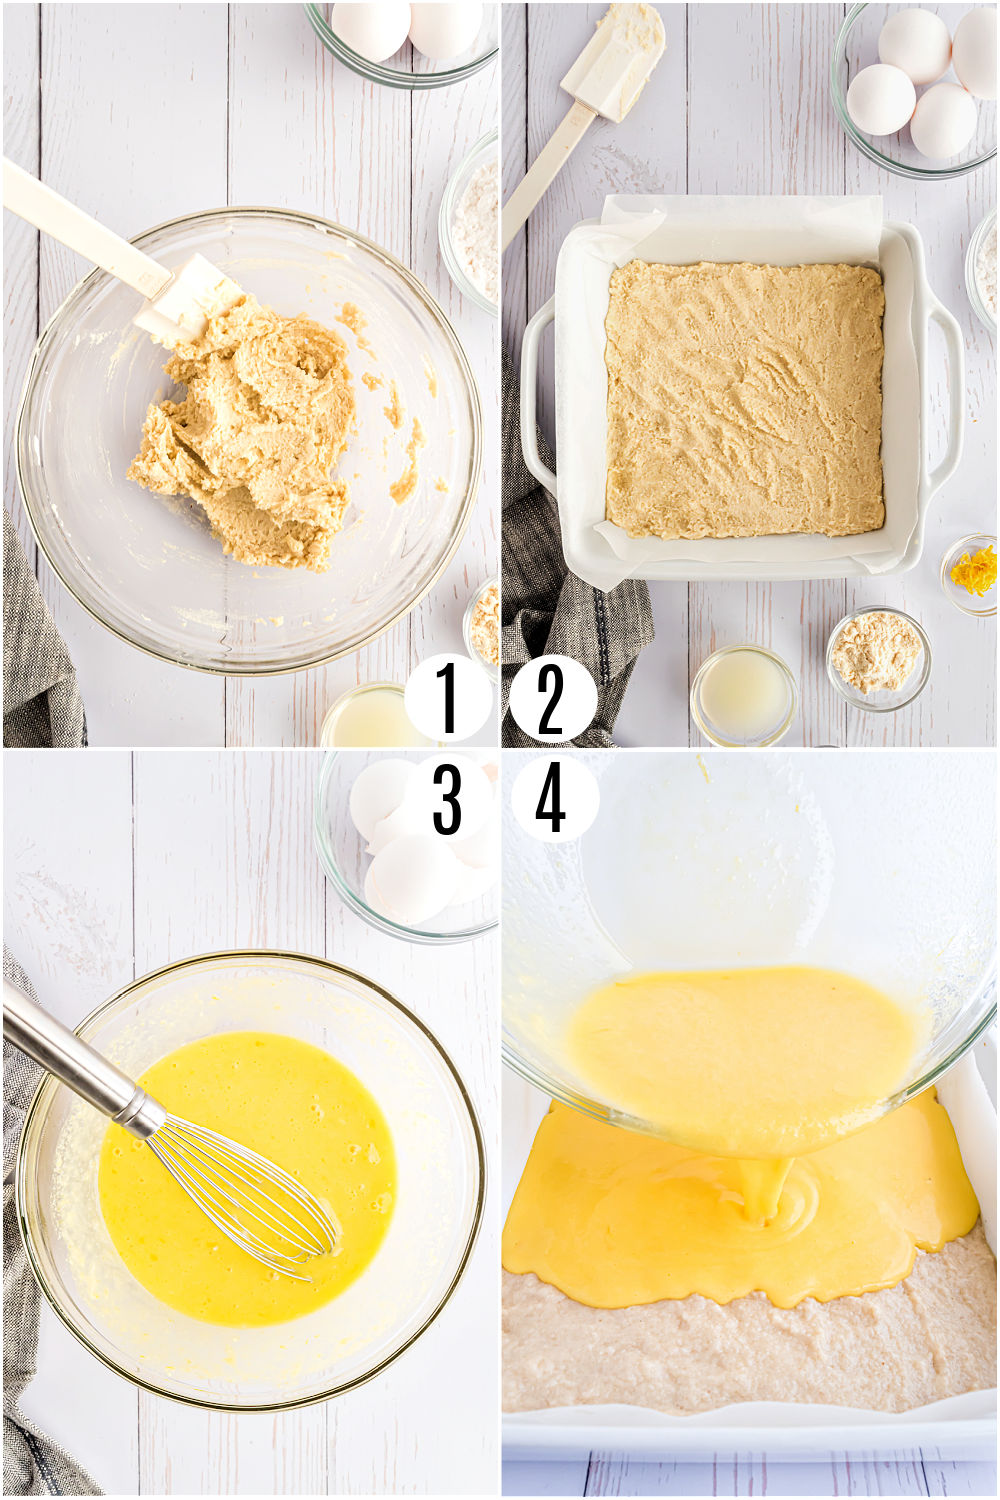 Step by step directions showing how to make lemon bars sugar free.